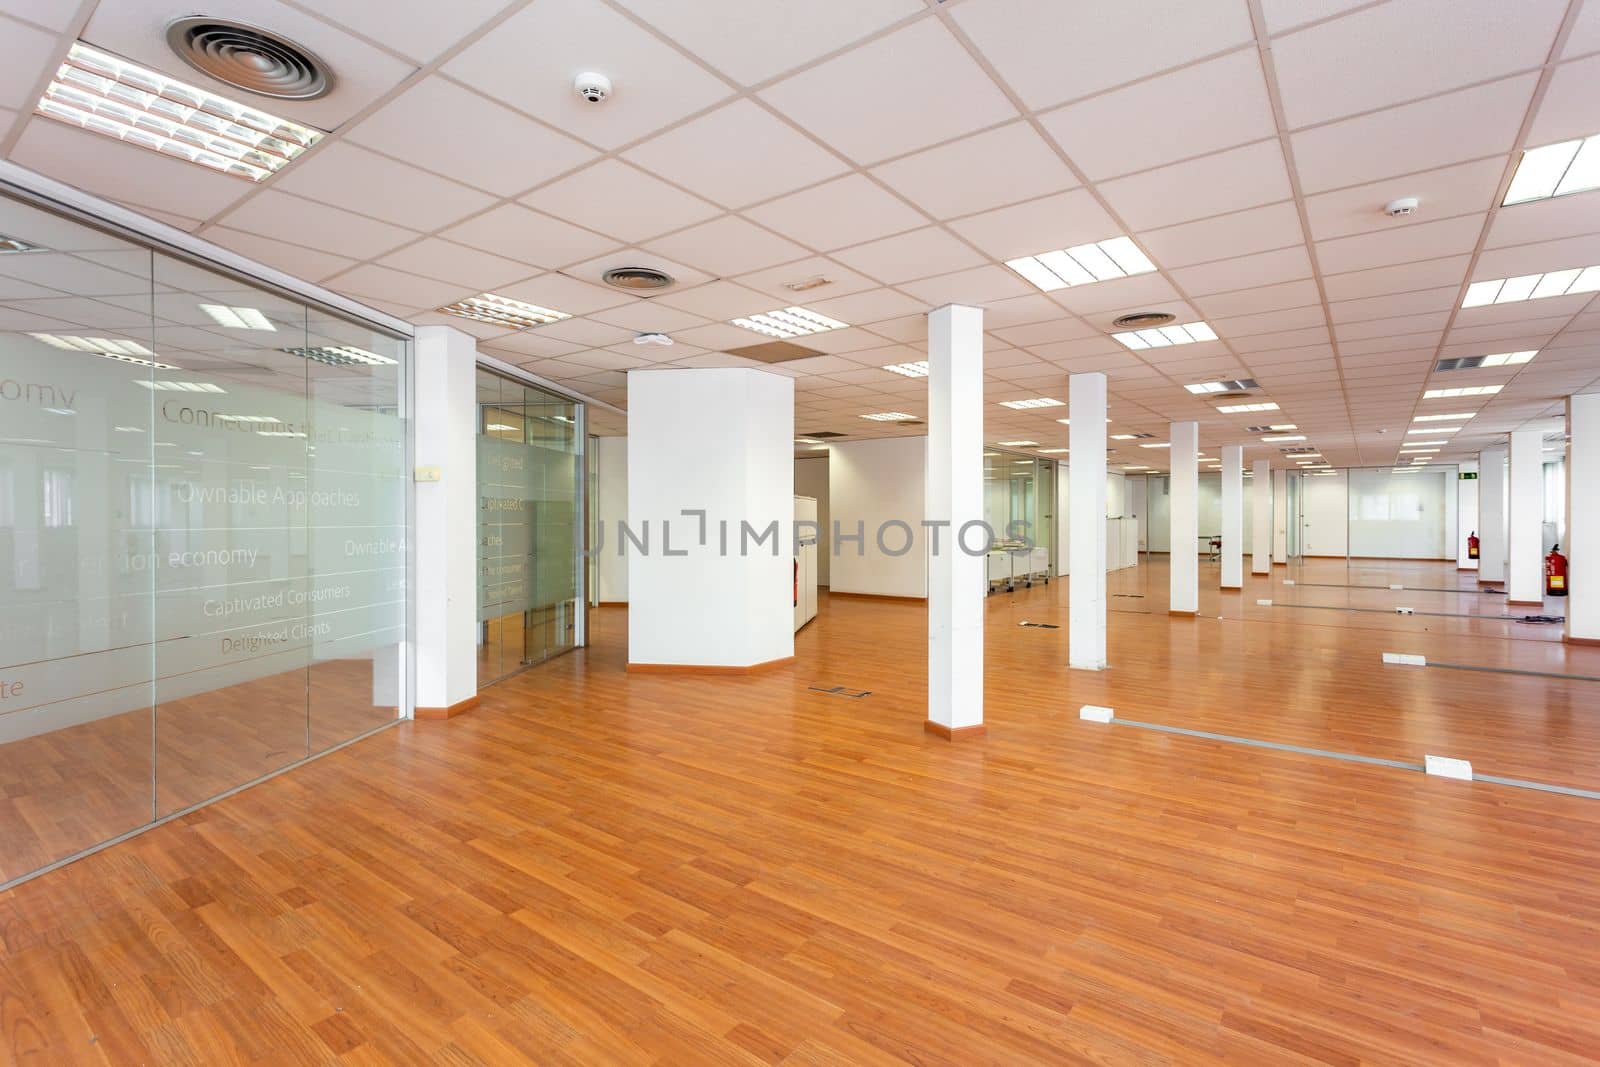 Large empty space with ceiling tiles, fluorescent lights, light brown laminate flooring and white painted columns. Large office space for rent just renovated and unfurnished by apavlin